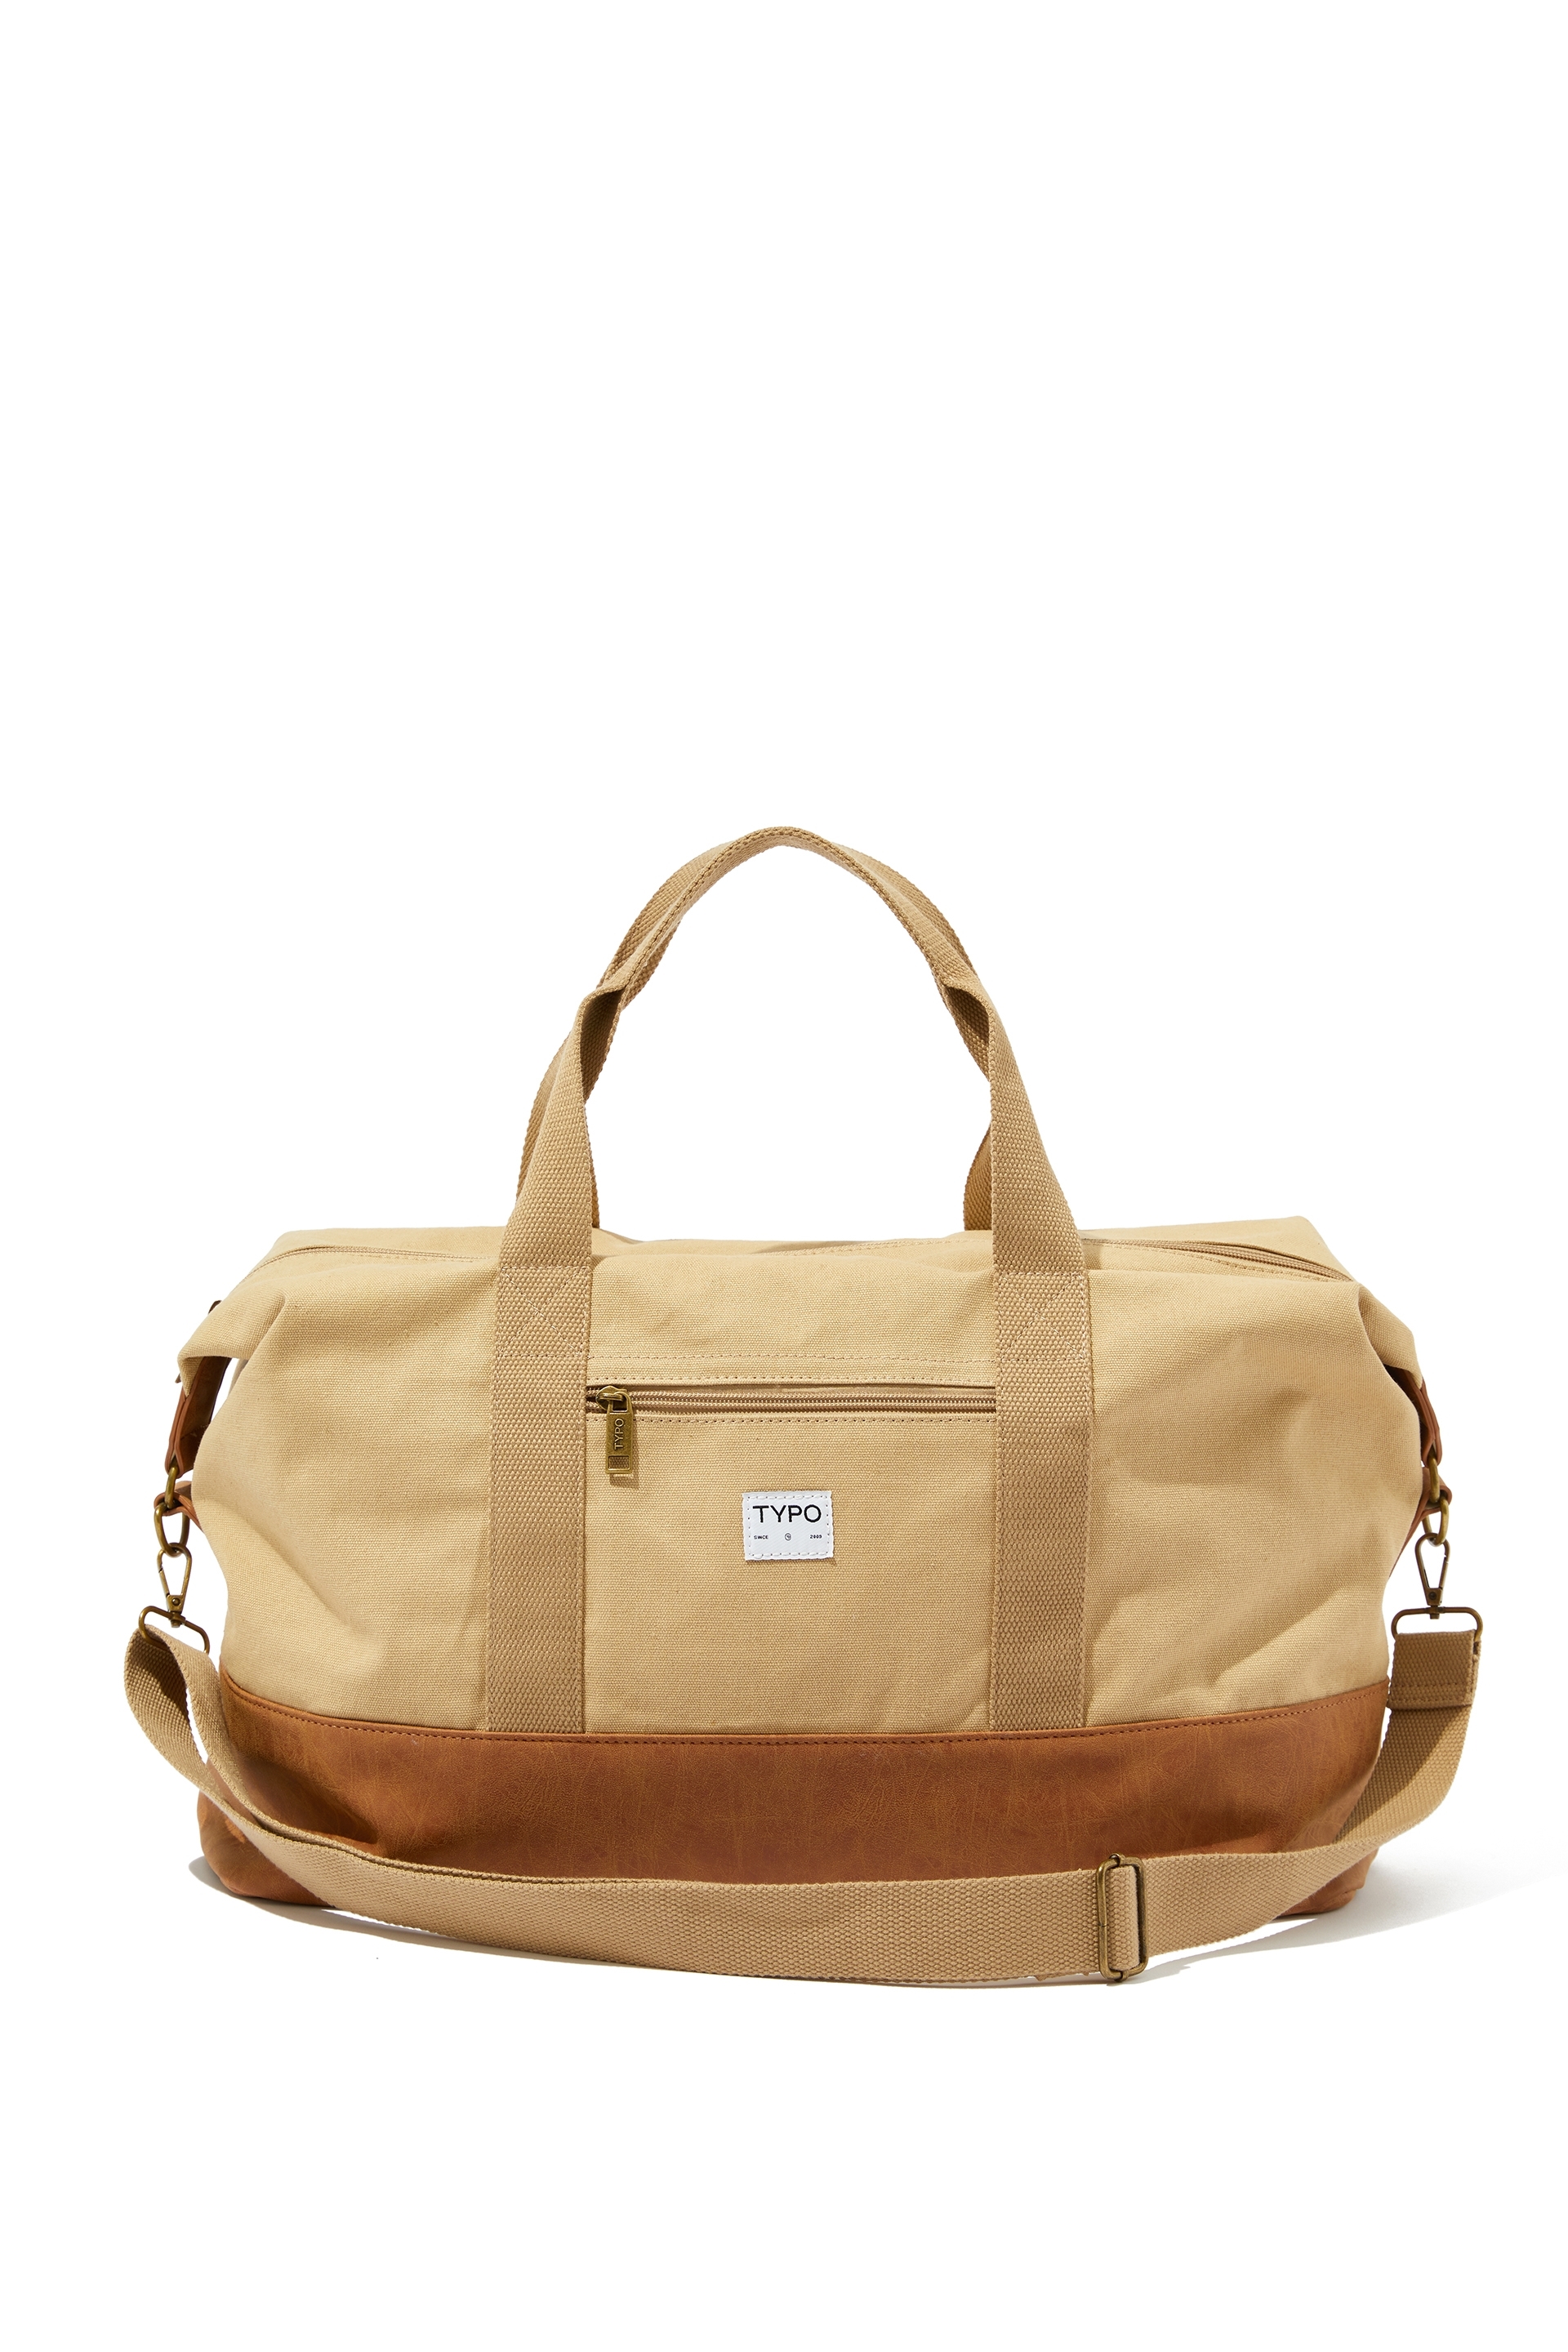 Typo - Explorer Hold All Duffle Bag - Sand